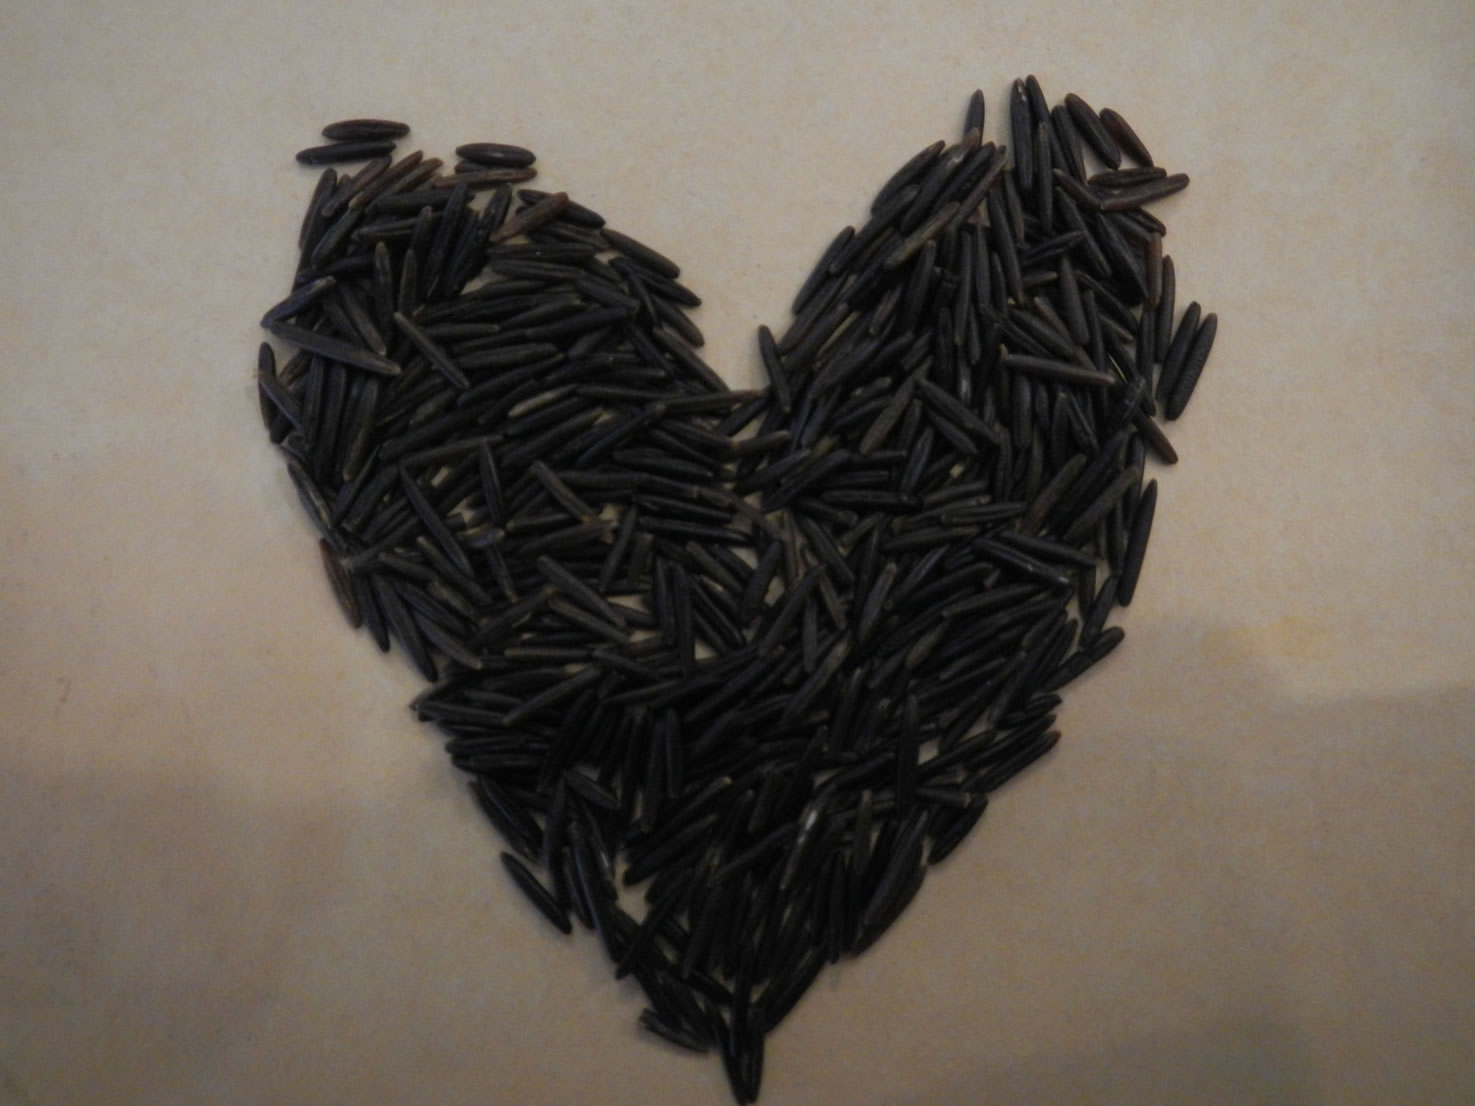 Image shows a heart-shaped pile of wild rice.